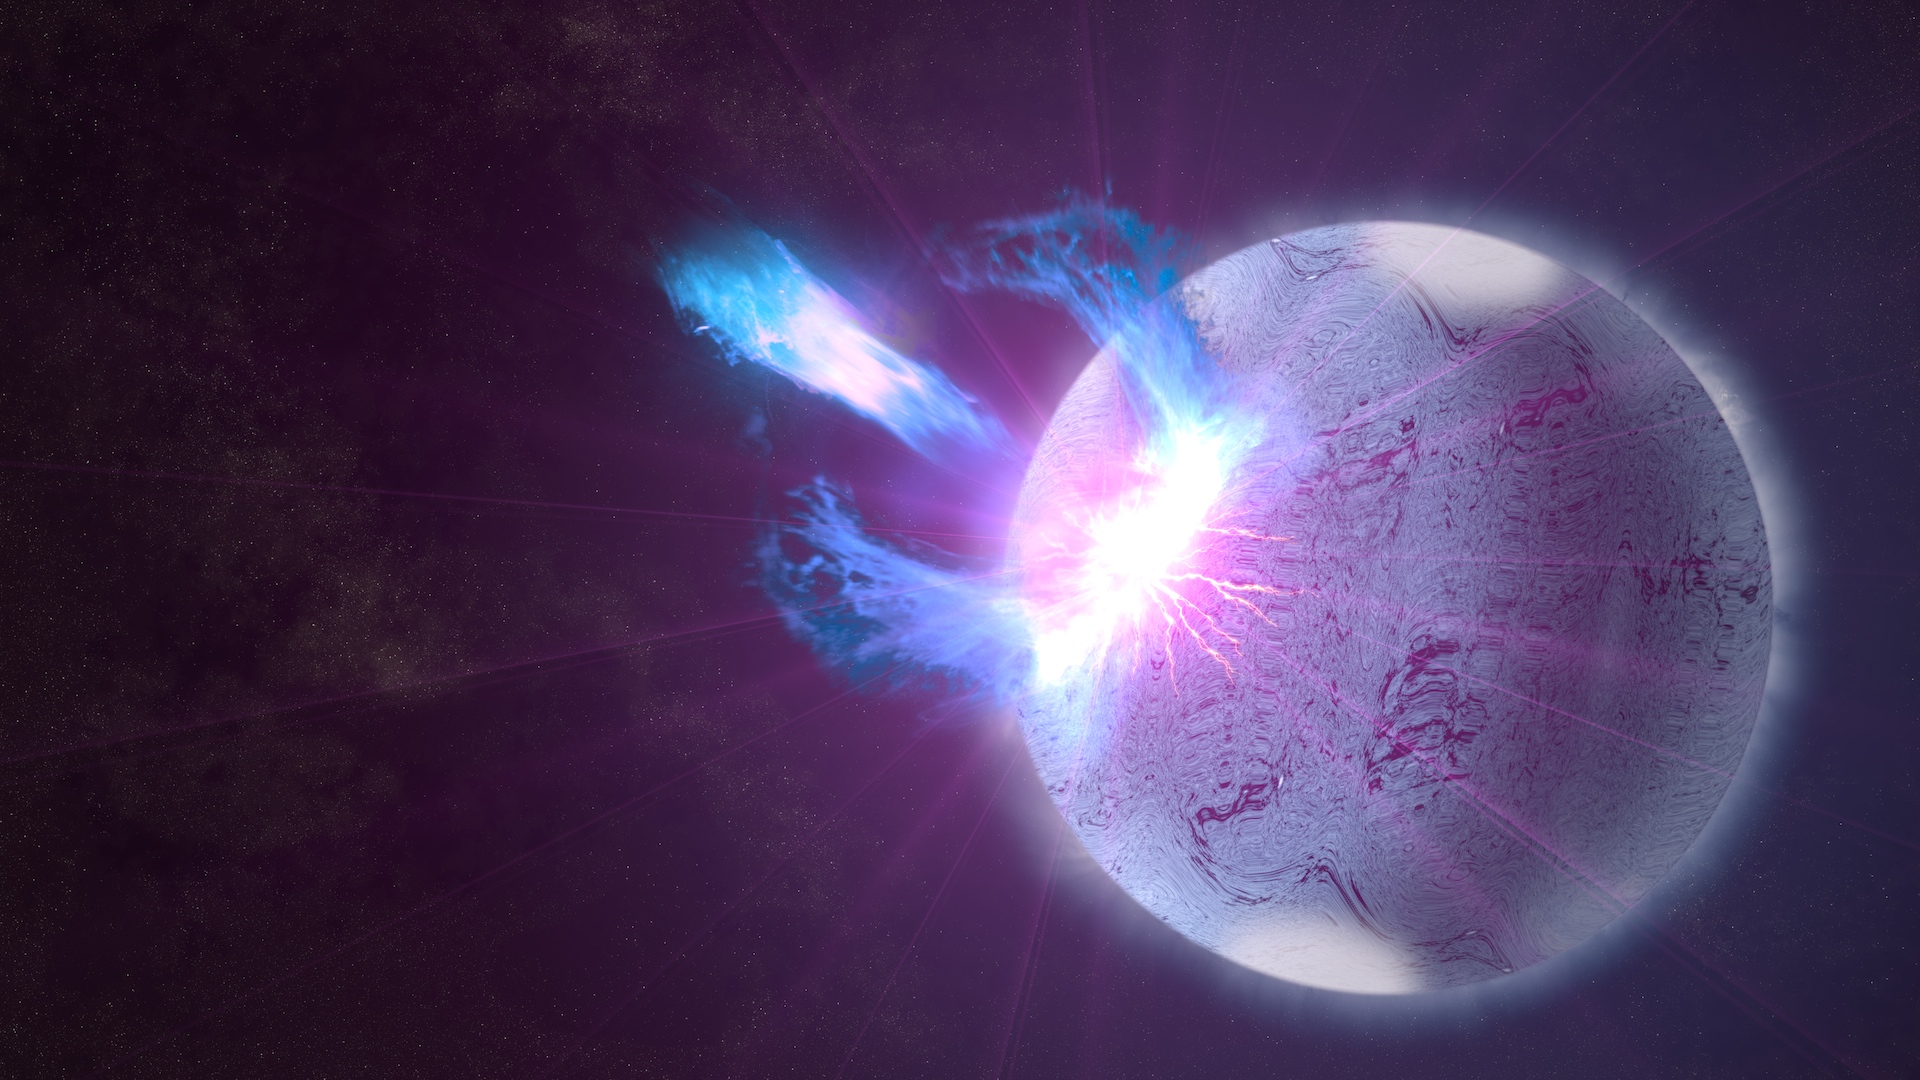 A new Record for the Strongest Magnetic Field Seen in the Universe: 1.6 Billion ..